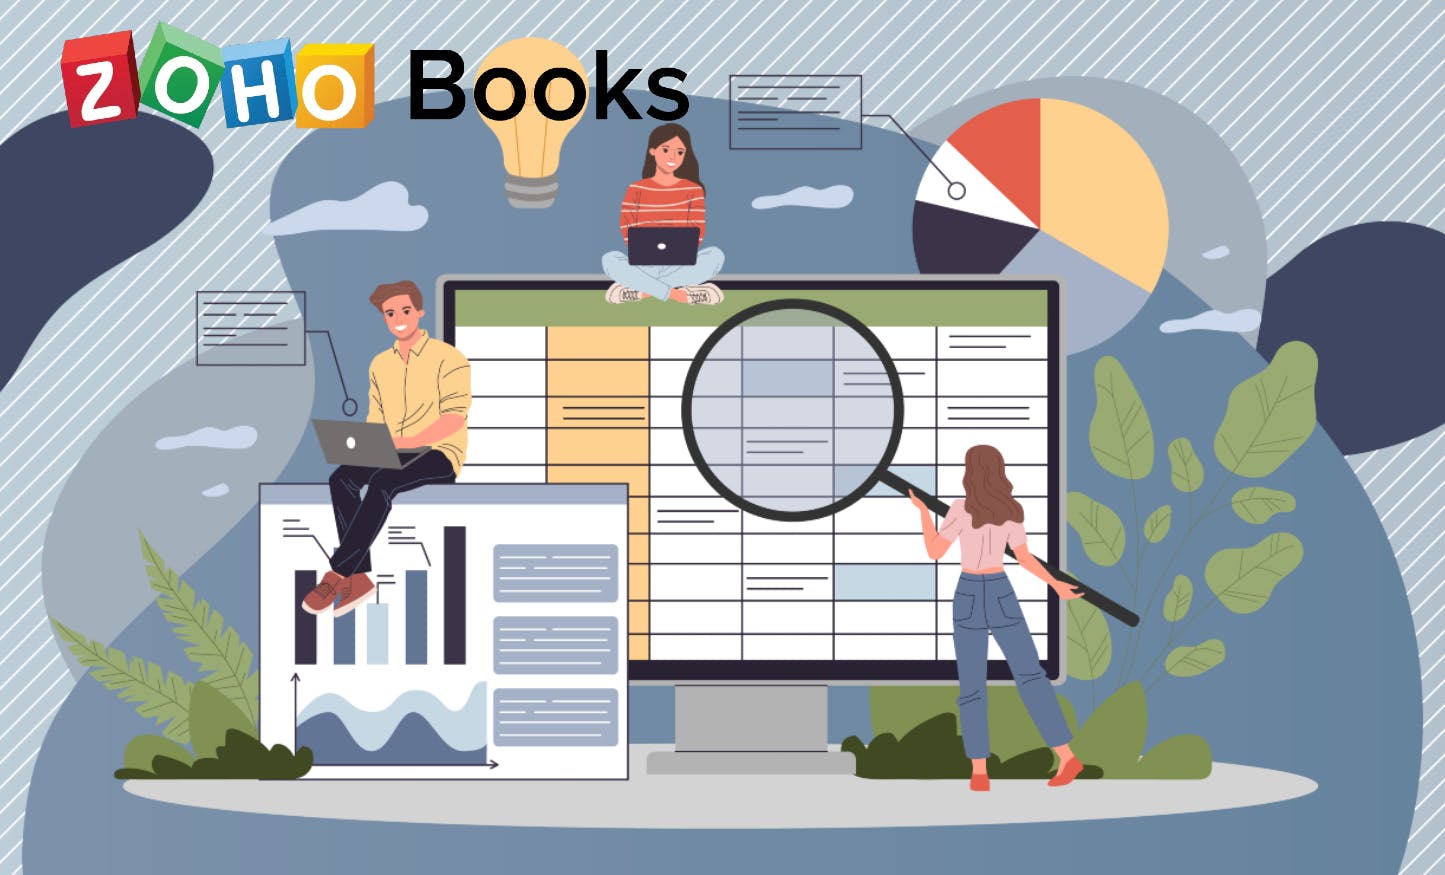 Zoho Books: Online Accounting & Bookkeeping Software Review 